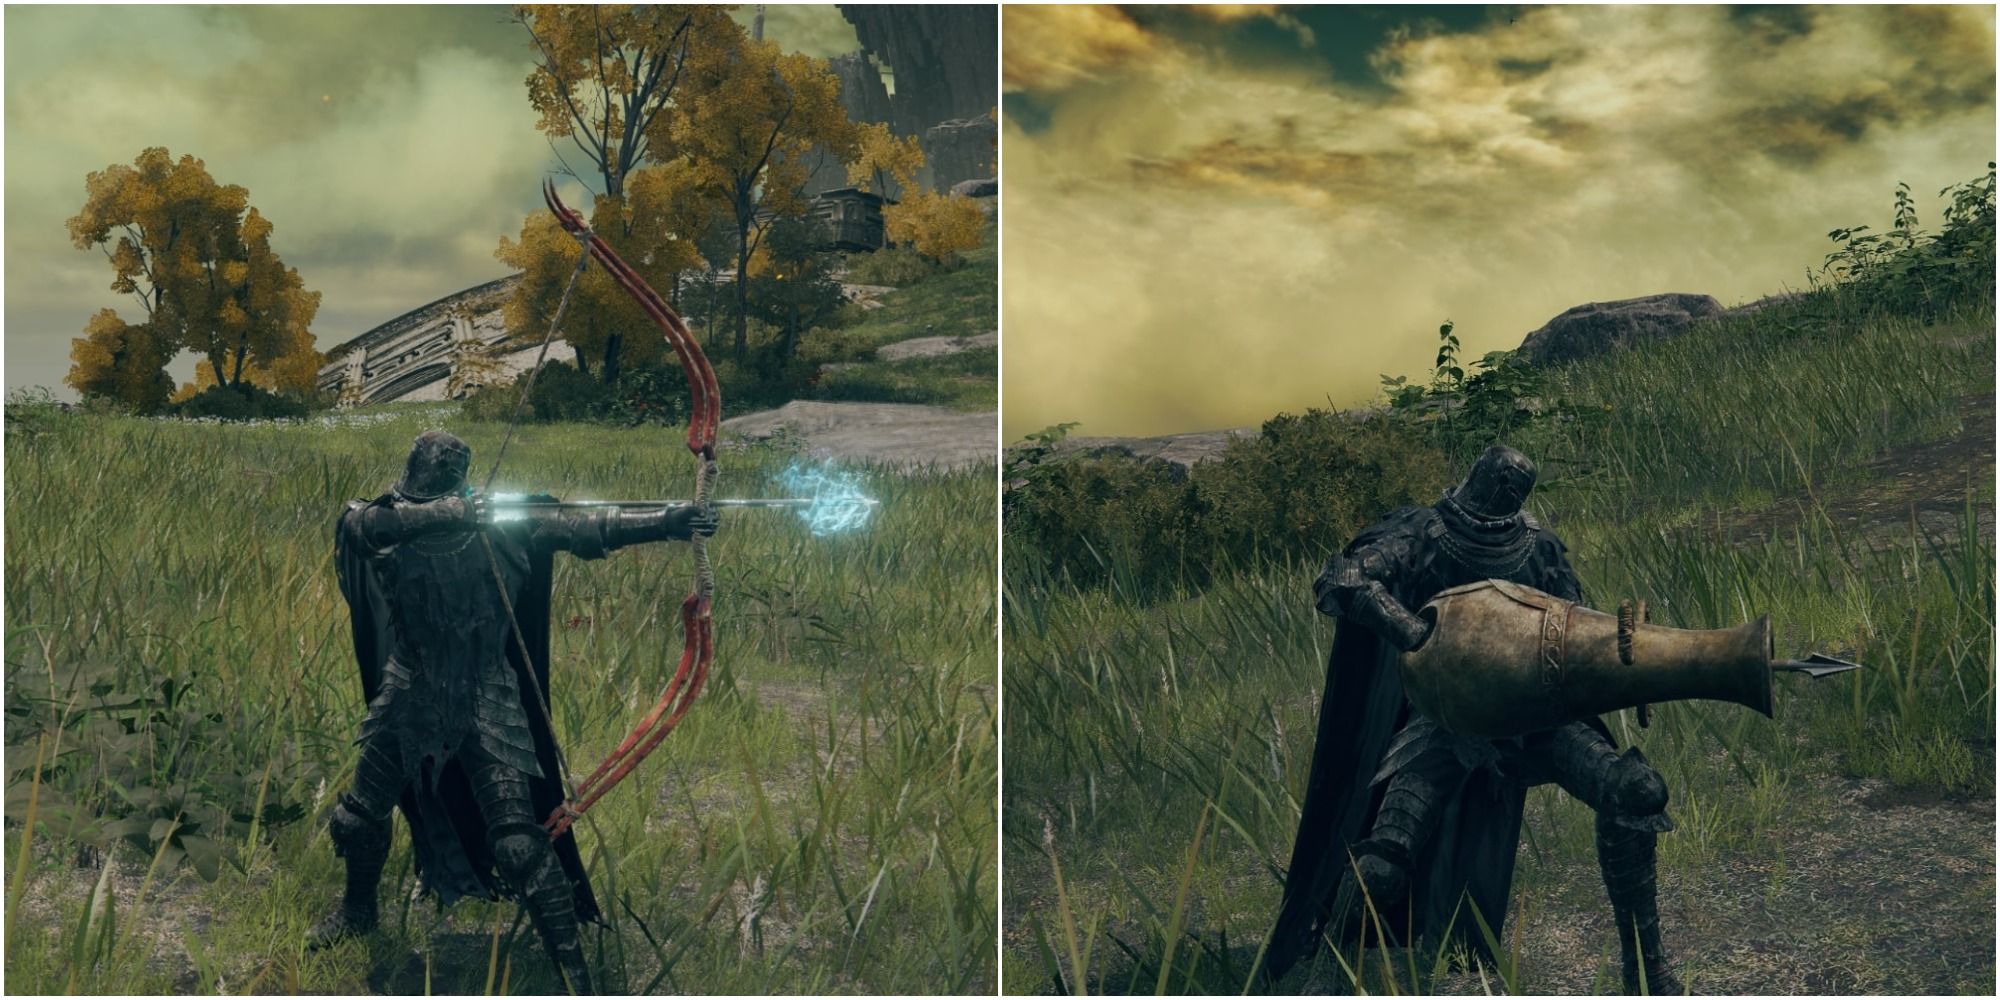 elden ring how to aim bow